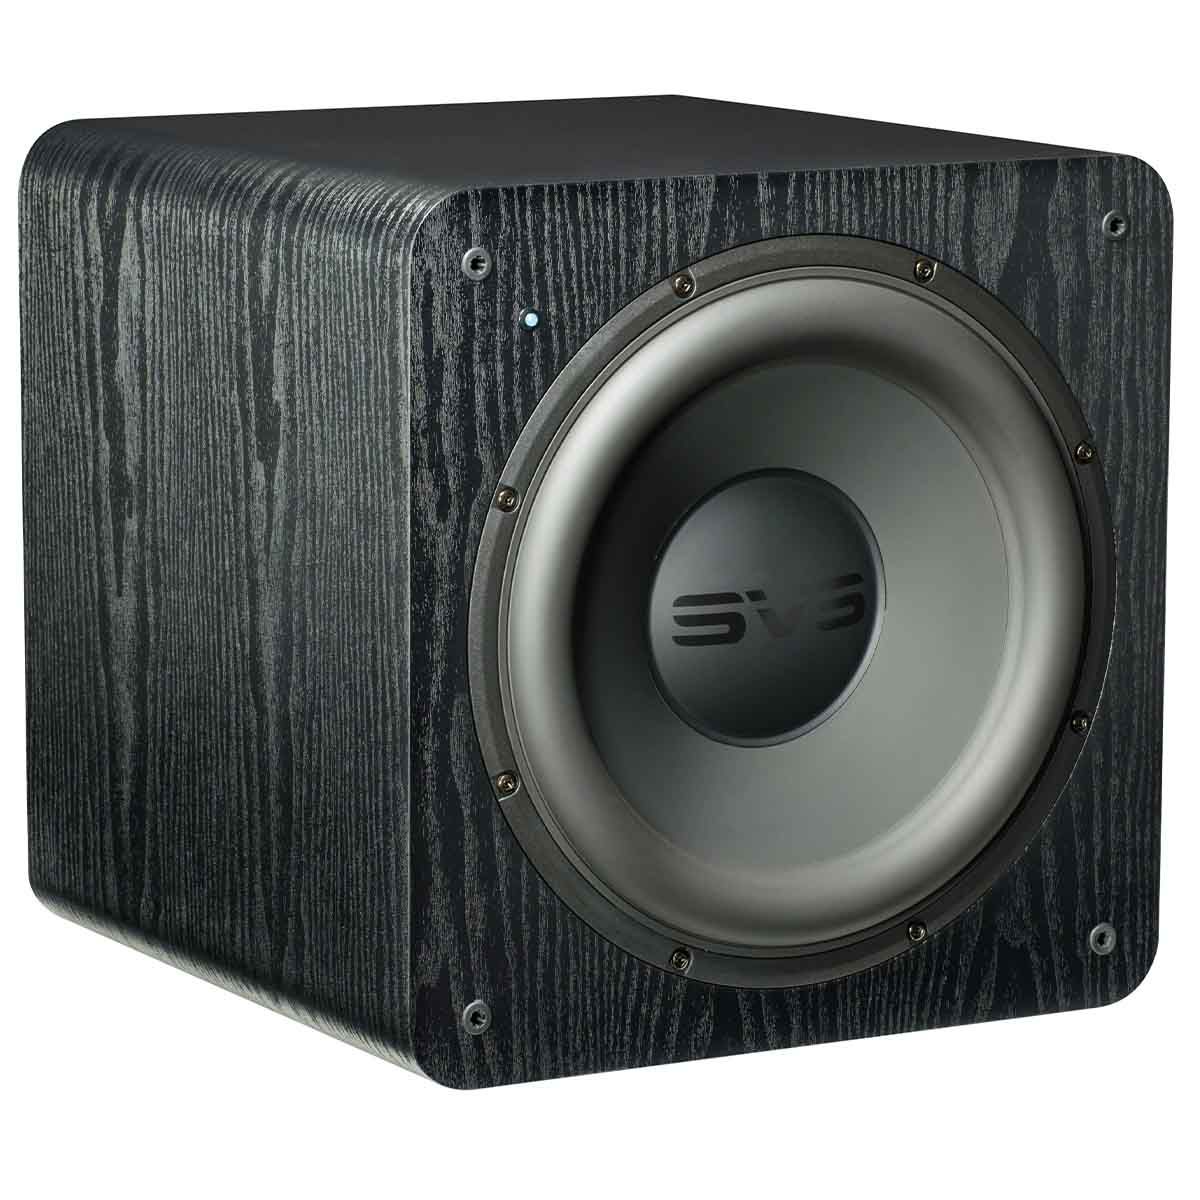 SVS SB-2000 12" Compact Sealed Subwoofer - Premium Black Ash - angled top view without grille